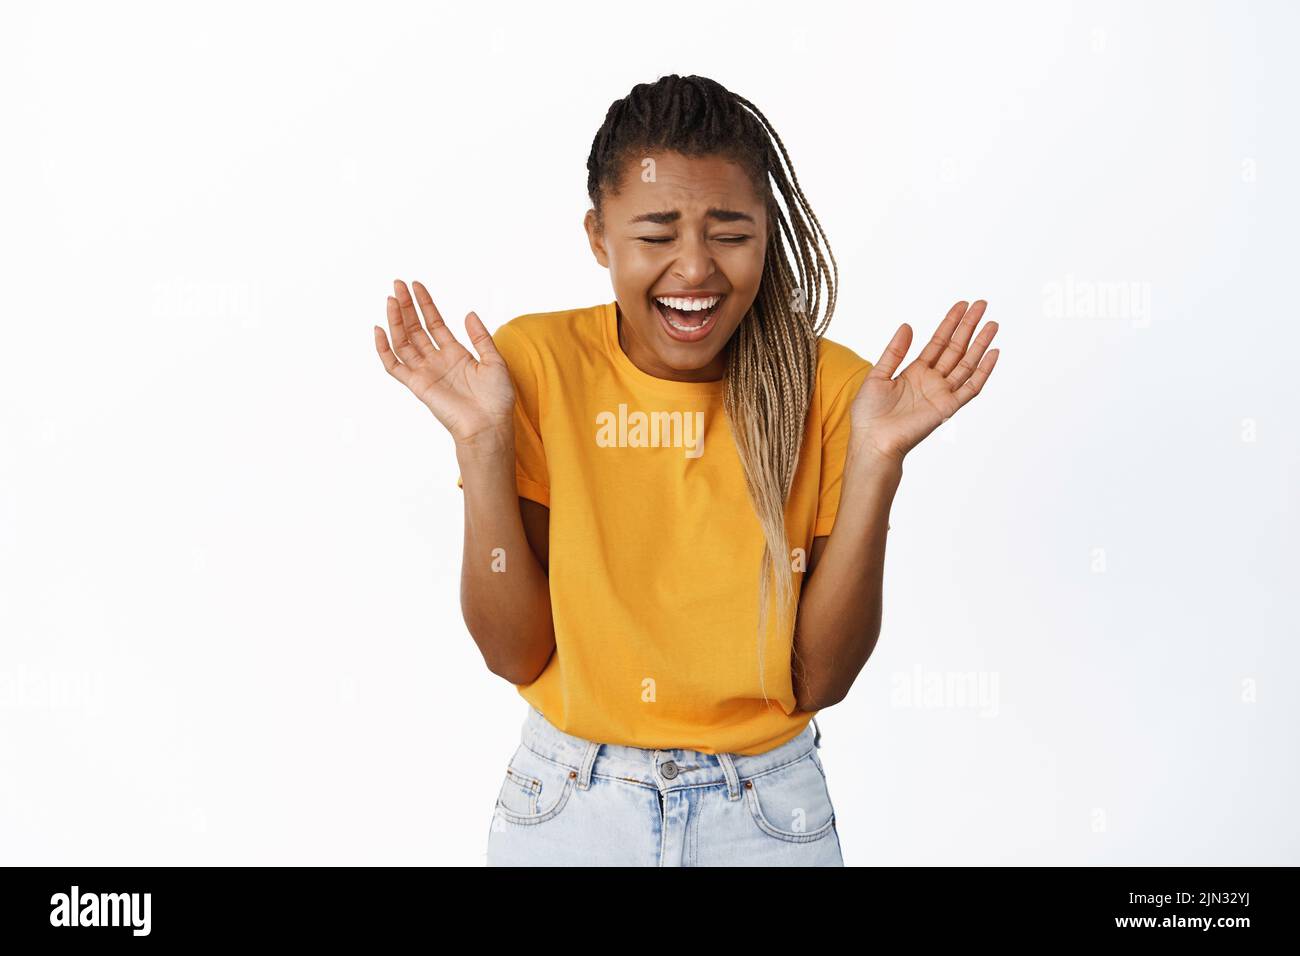 Happy, beautiful african american woman laughing and smiling, chuckle with empty hands raised up, standing in yellow tshirt over white background Stock Photo